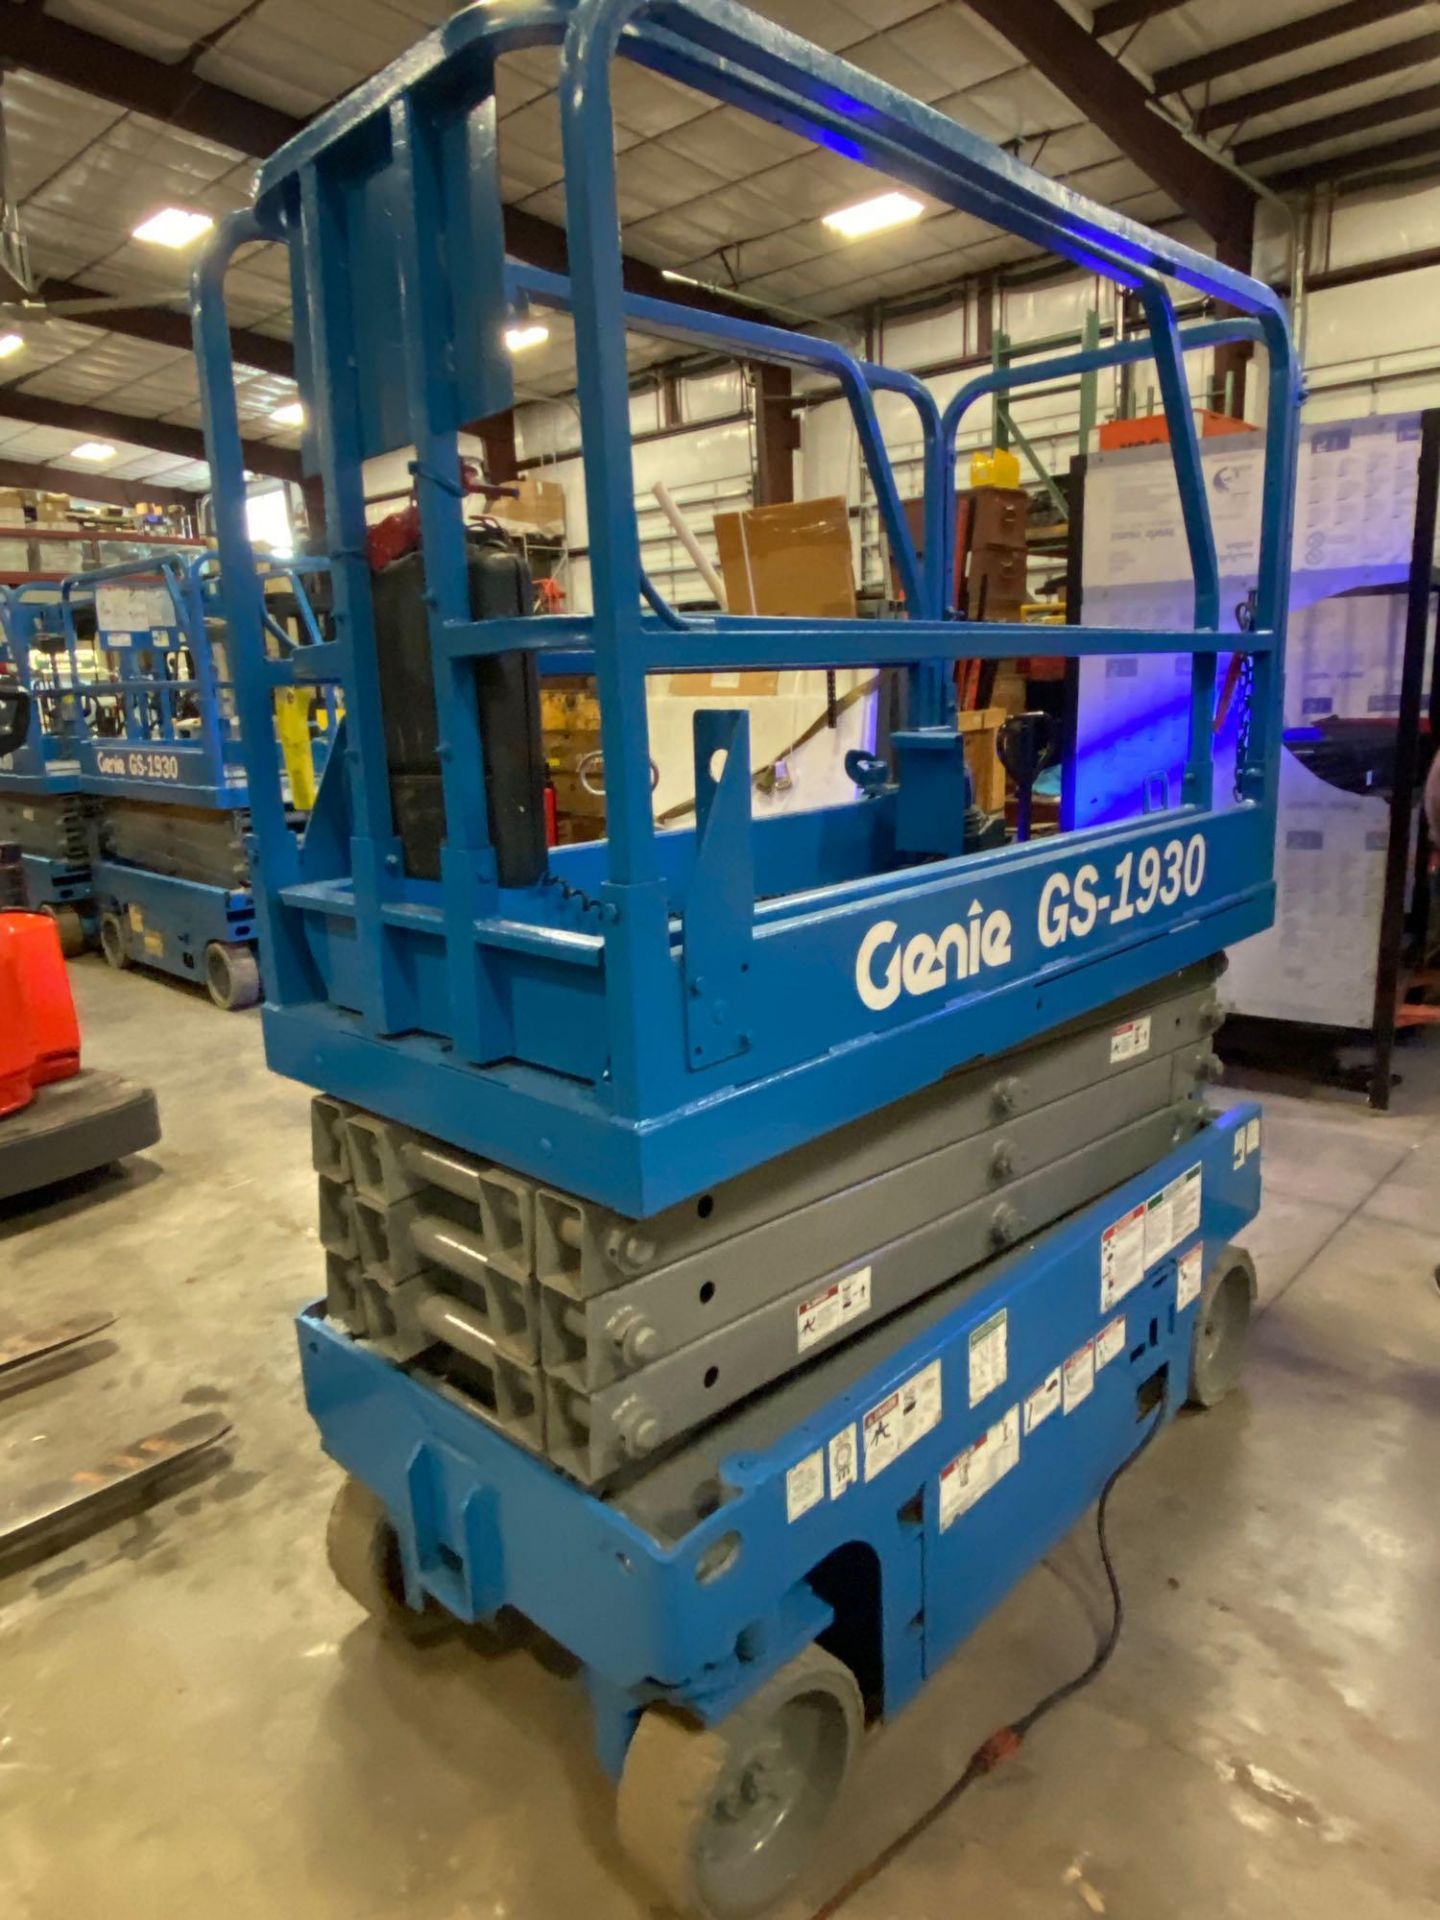 GENIE GS-1930 ELECTRIC SCISSOR LIFT, SELF PROPELLED, 19' PLATFORM HEIGHT, BUILT IN BATTERY CHARGER, - Image 2 of 5